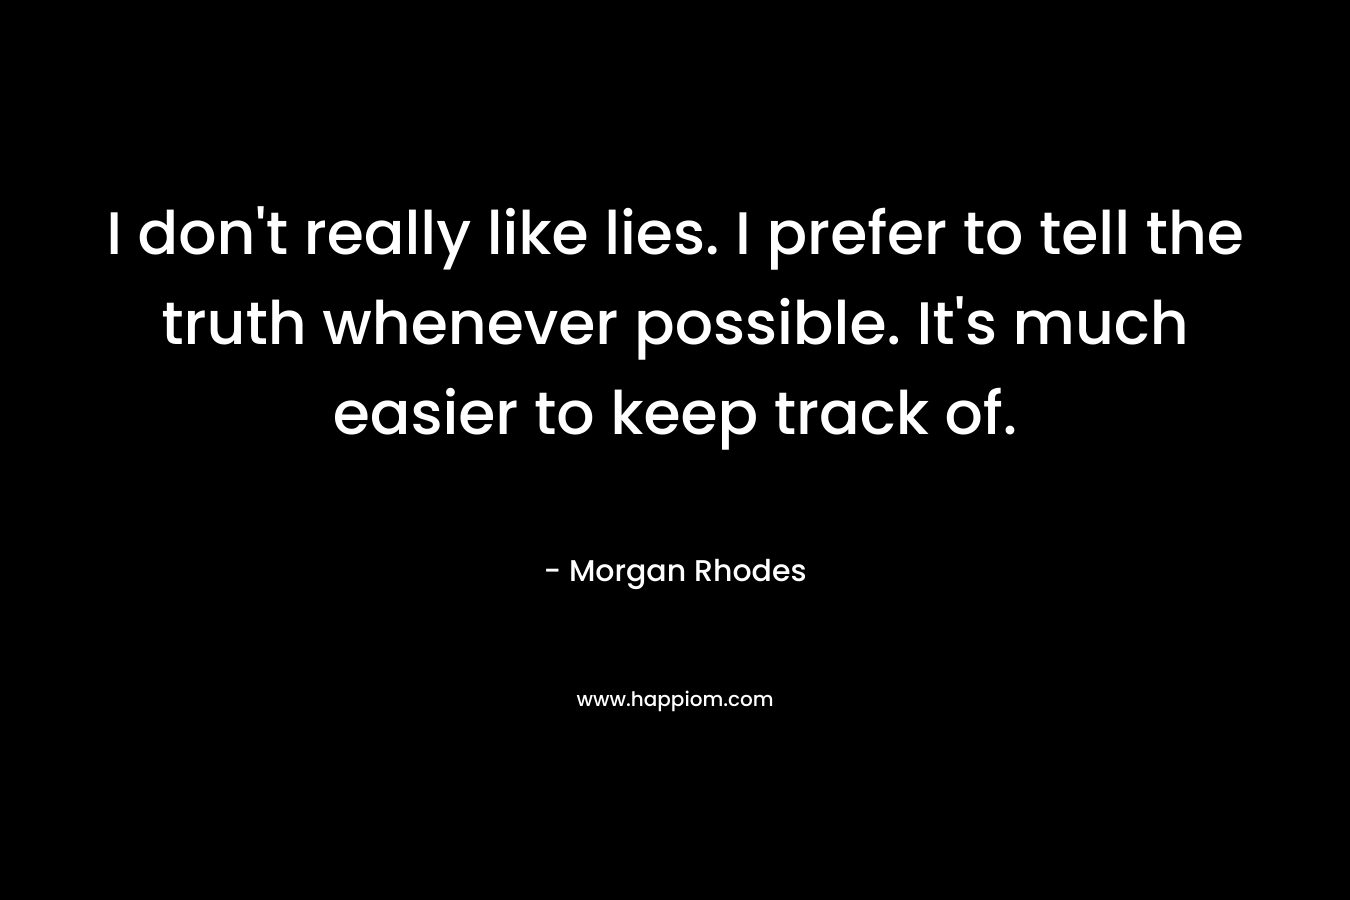 I don’t really like lies. I prefer to tell the truth whenever possible. It’s much easier to keep track of. – Morgan Rhodes